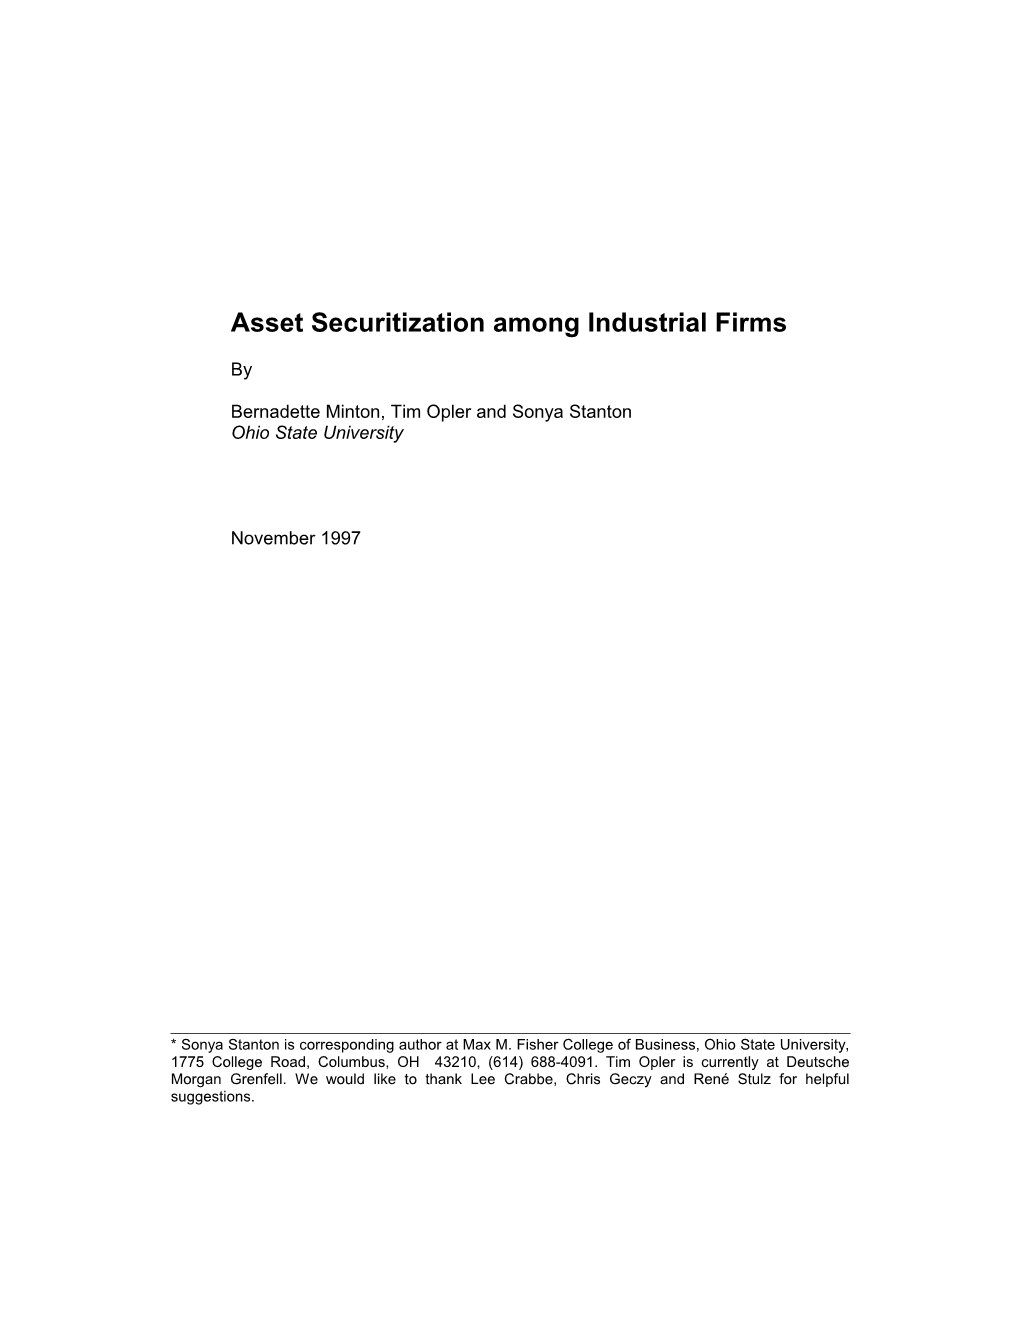 The Determinants of Asset Securitization Among Industrial Firms